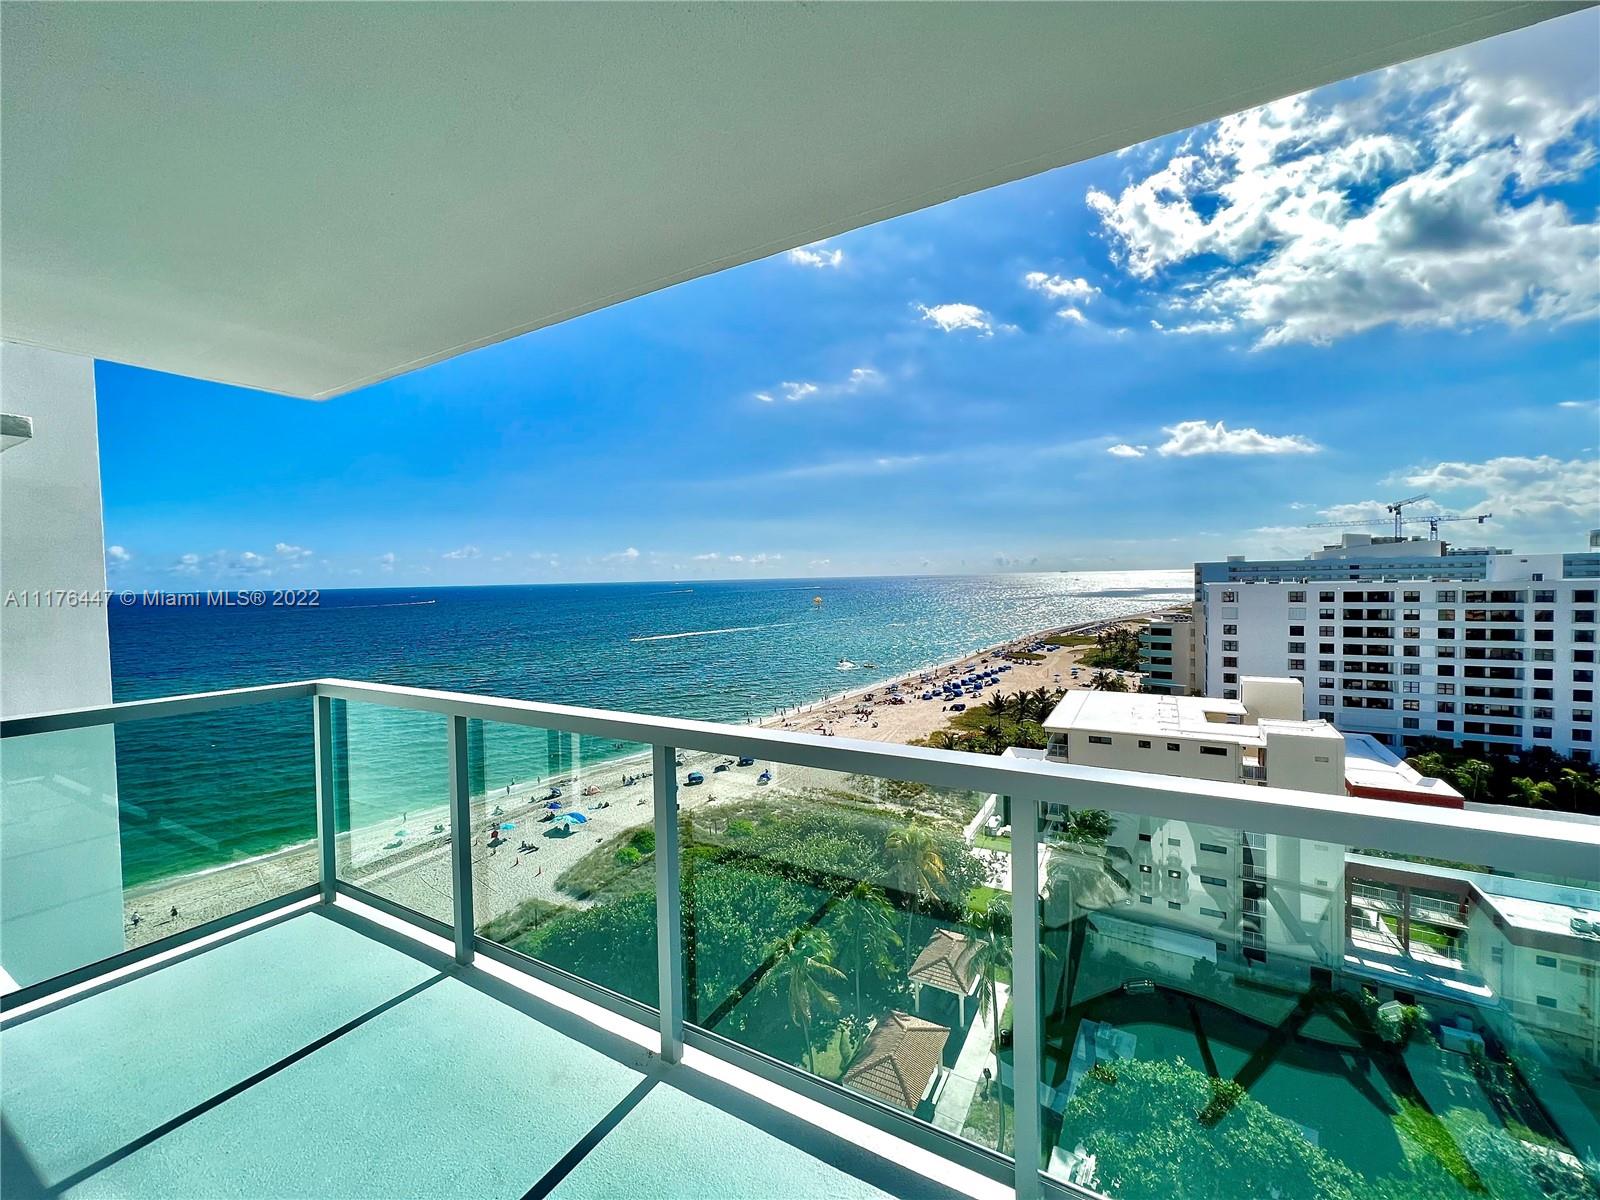 BREATHTAKING UNOBSTRUCTED PANORAMIC OCEAN AND SUNSET VIEW FROM THIS TOP FLOOR 2 BED – 2 BATH !! The building has undergone major renovations last year including brand new balconies with glass panels, new roof, new paint, waterproofing, redone catwalks & common areas. This building is literally on the beach: come off the elevator and you are on the sand! The unit features 2 master bedrooms: one with ocean view and one with sunset view. Close to all activities, new restaurants, ...
UPDATE: TENANT CHECKED OUT AND UNIT WAS REFRESHED